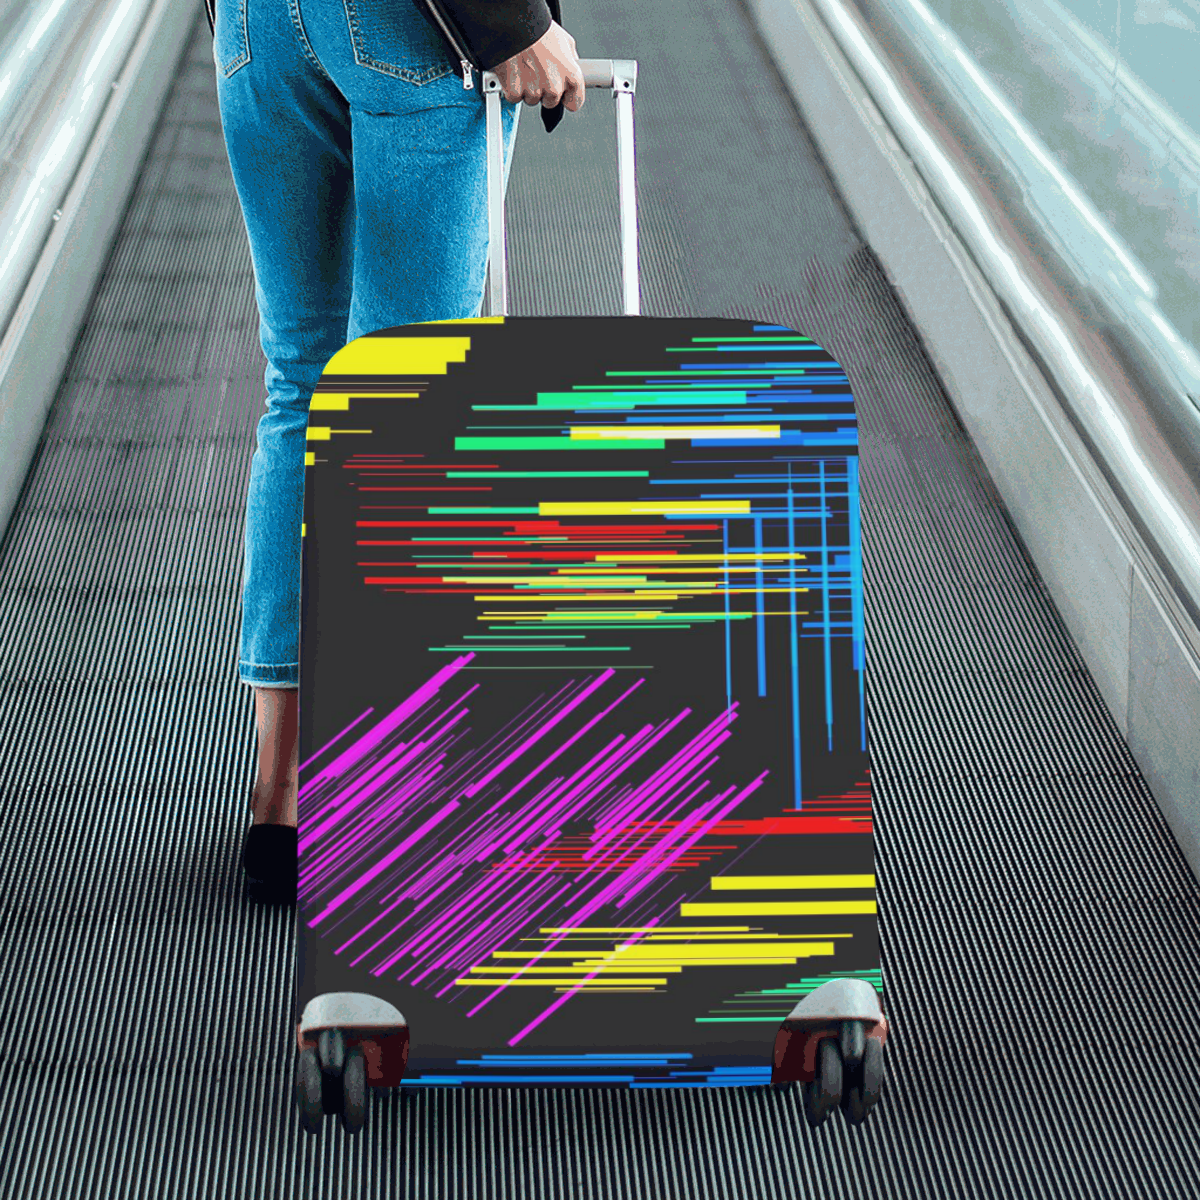 New Pattern factory 2A by JamColors Luggage Cover/Large 26"-28"